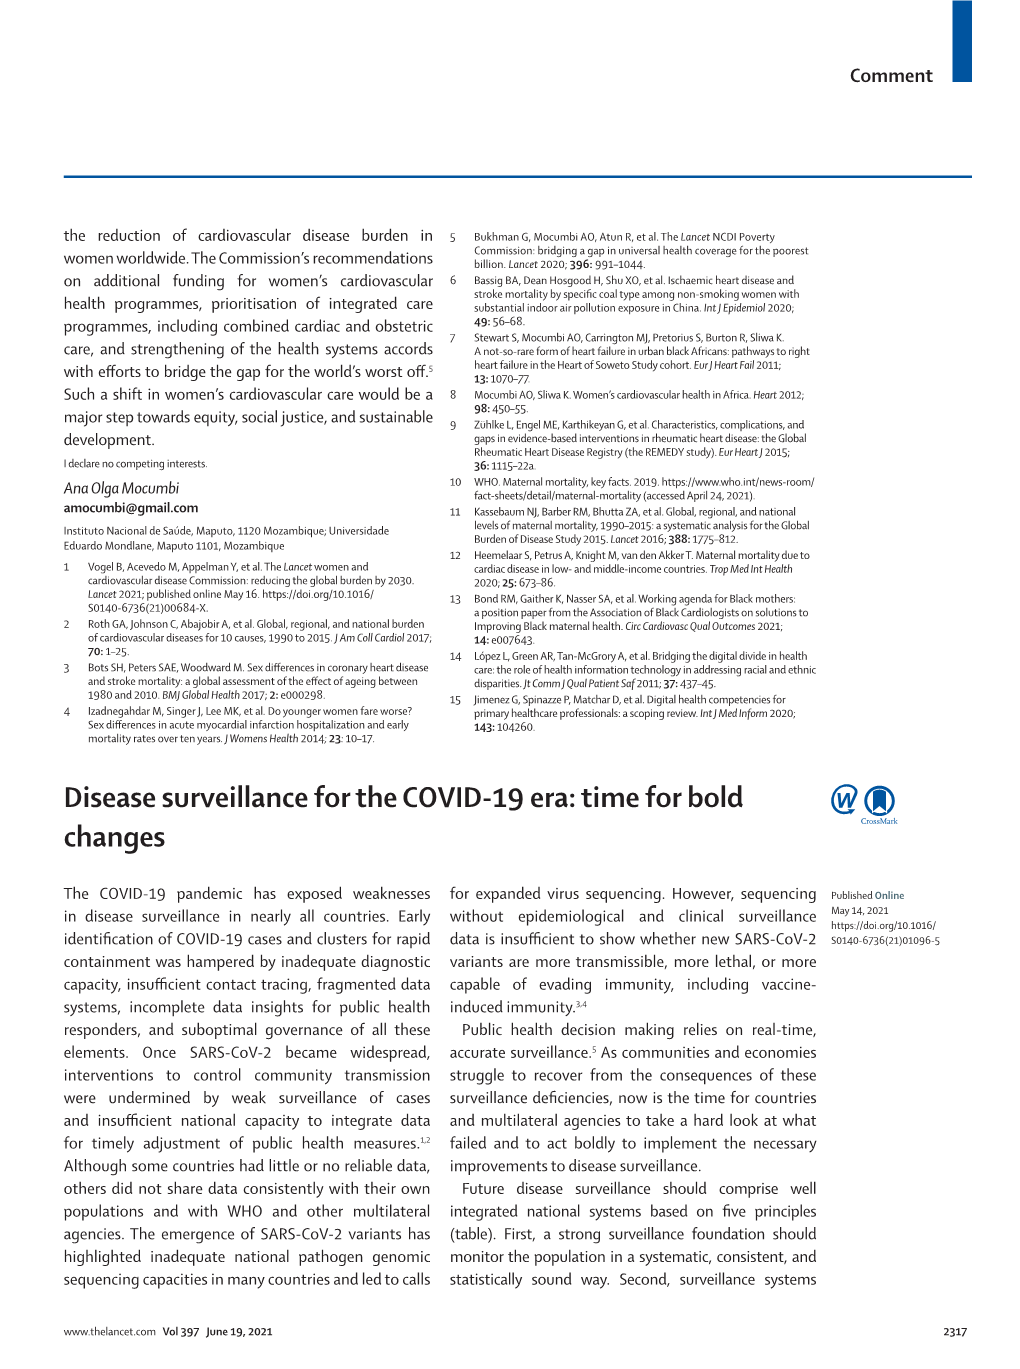 Disease Surveillance for the COVID-19 Era: Time for Bold Changes